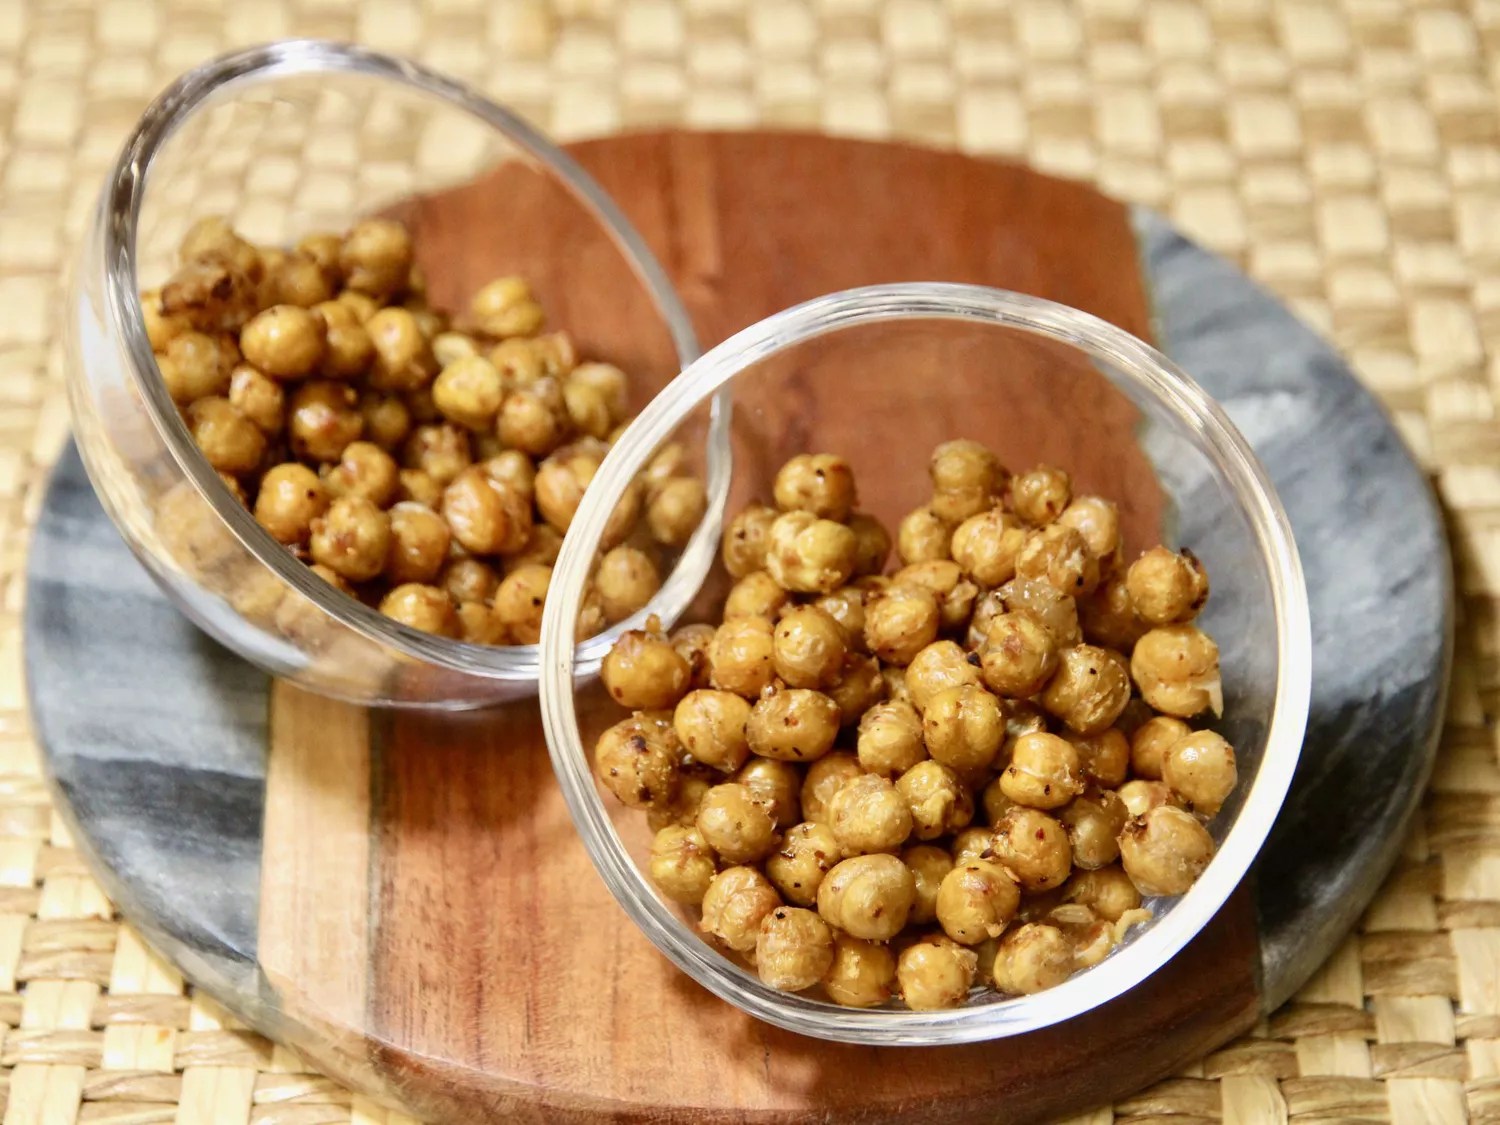 Crispy Air Fryer Chickpeas – The Ultimate Snack!